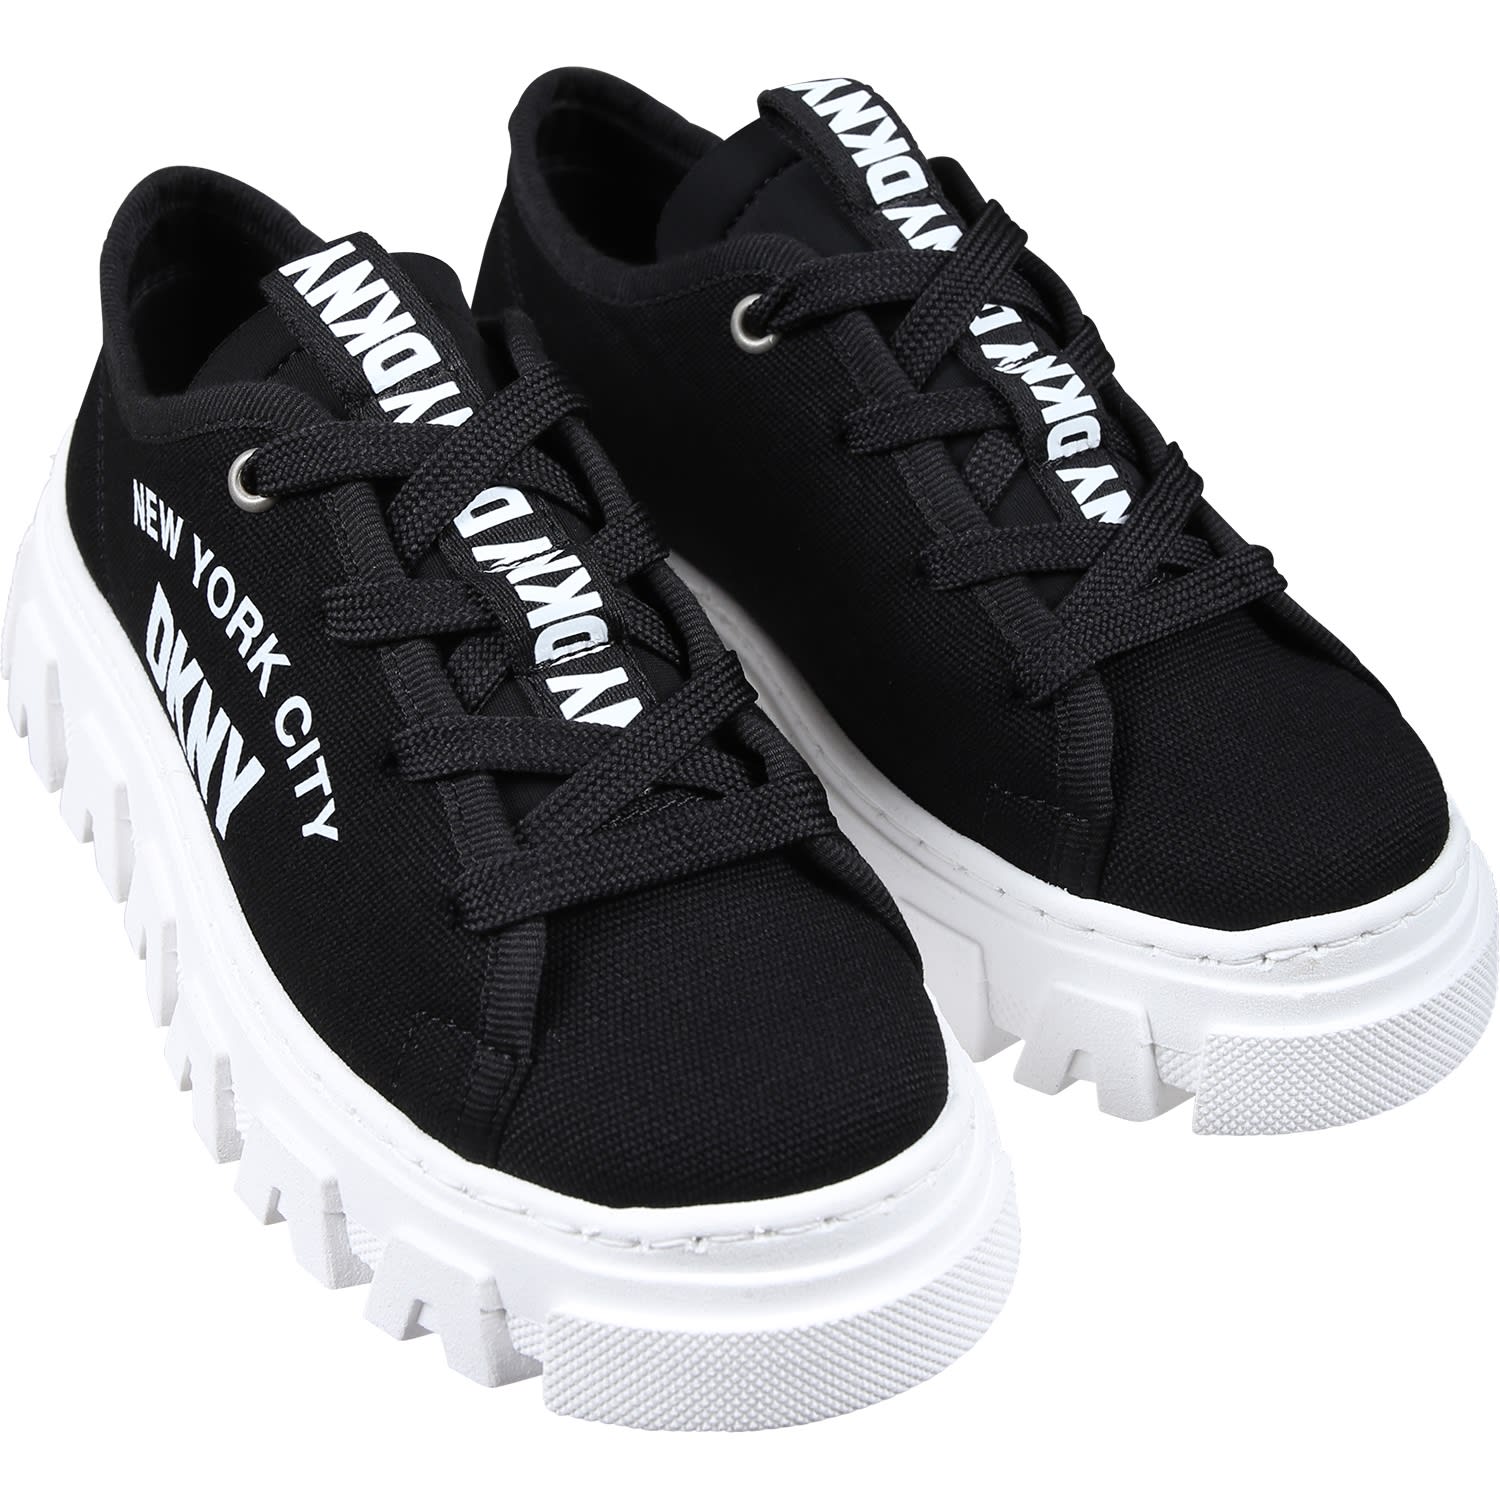 Shop Dkny Black Sneakers For Girl With Logo